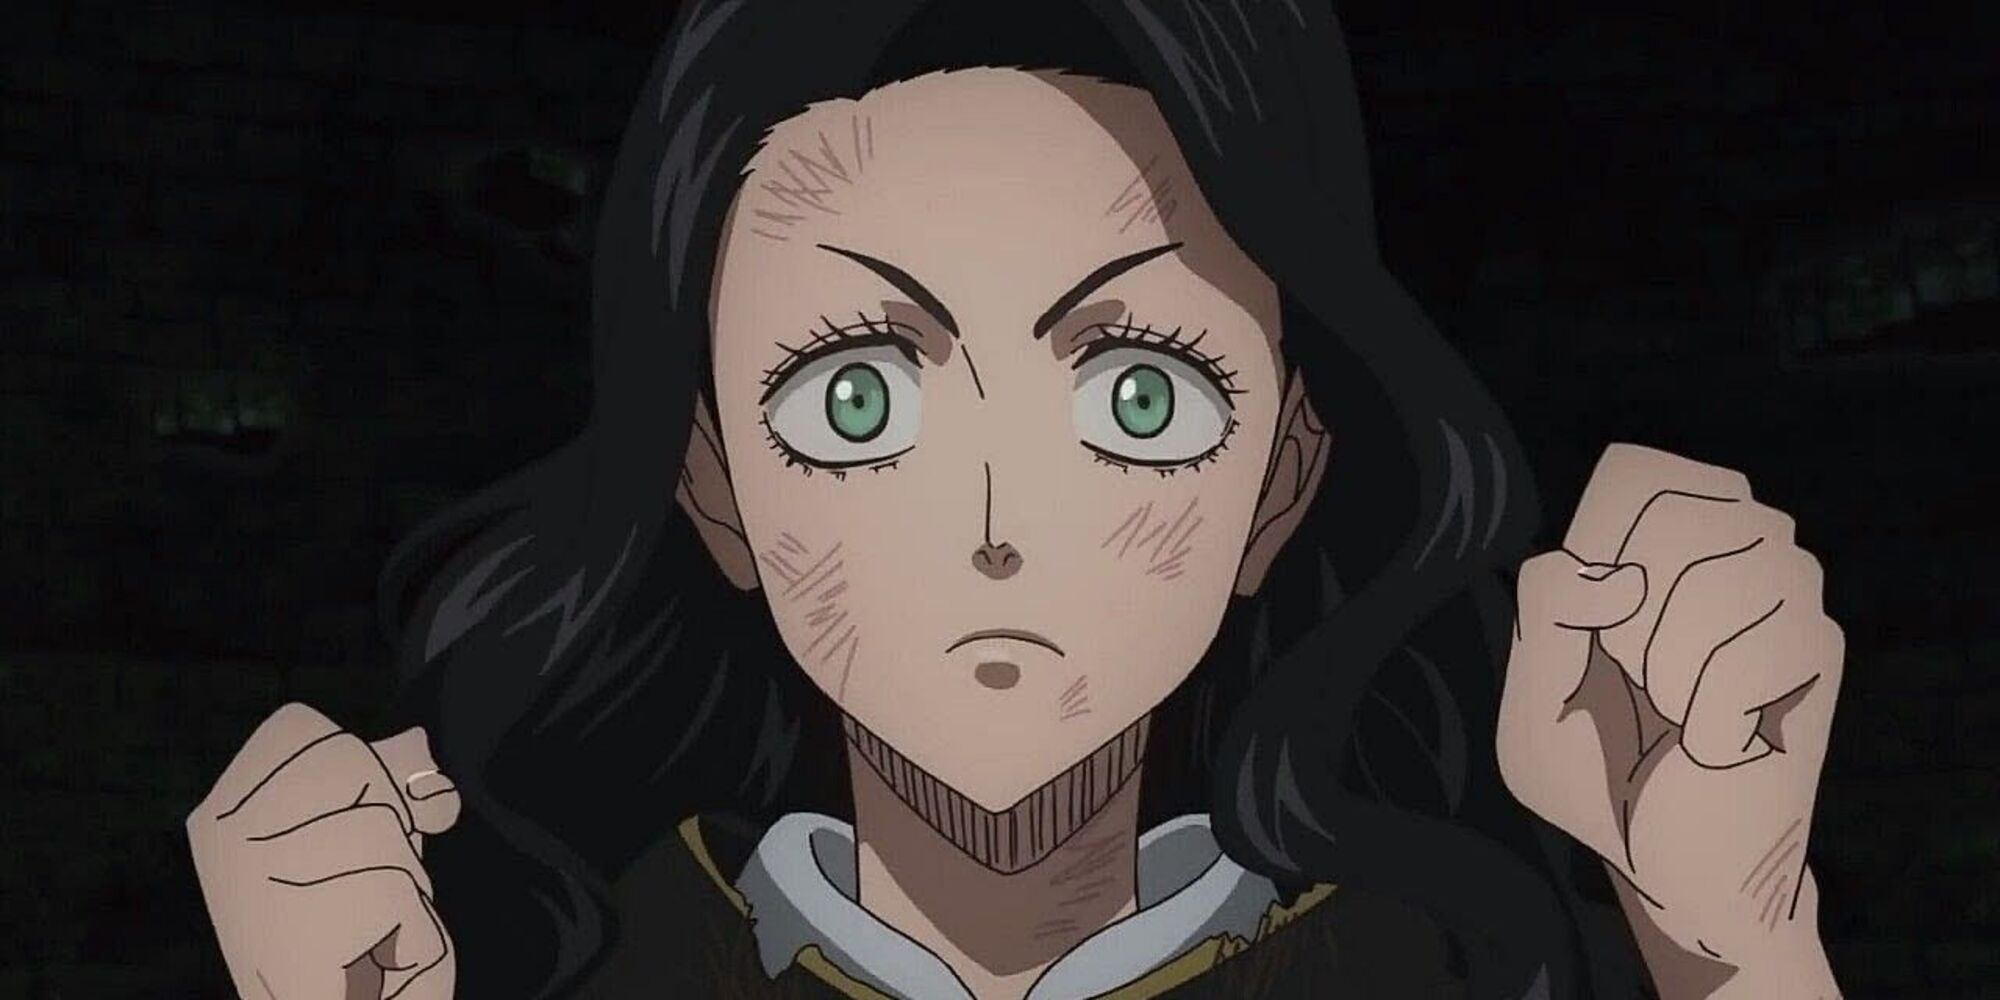 Black Clover's Charmy Pappitson with fists raised